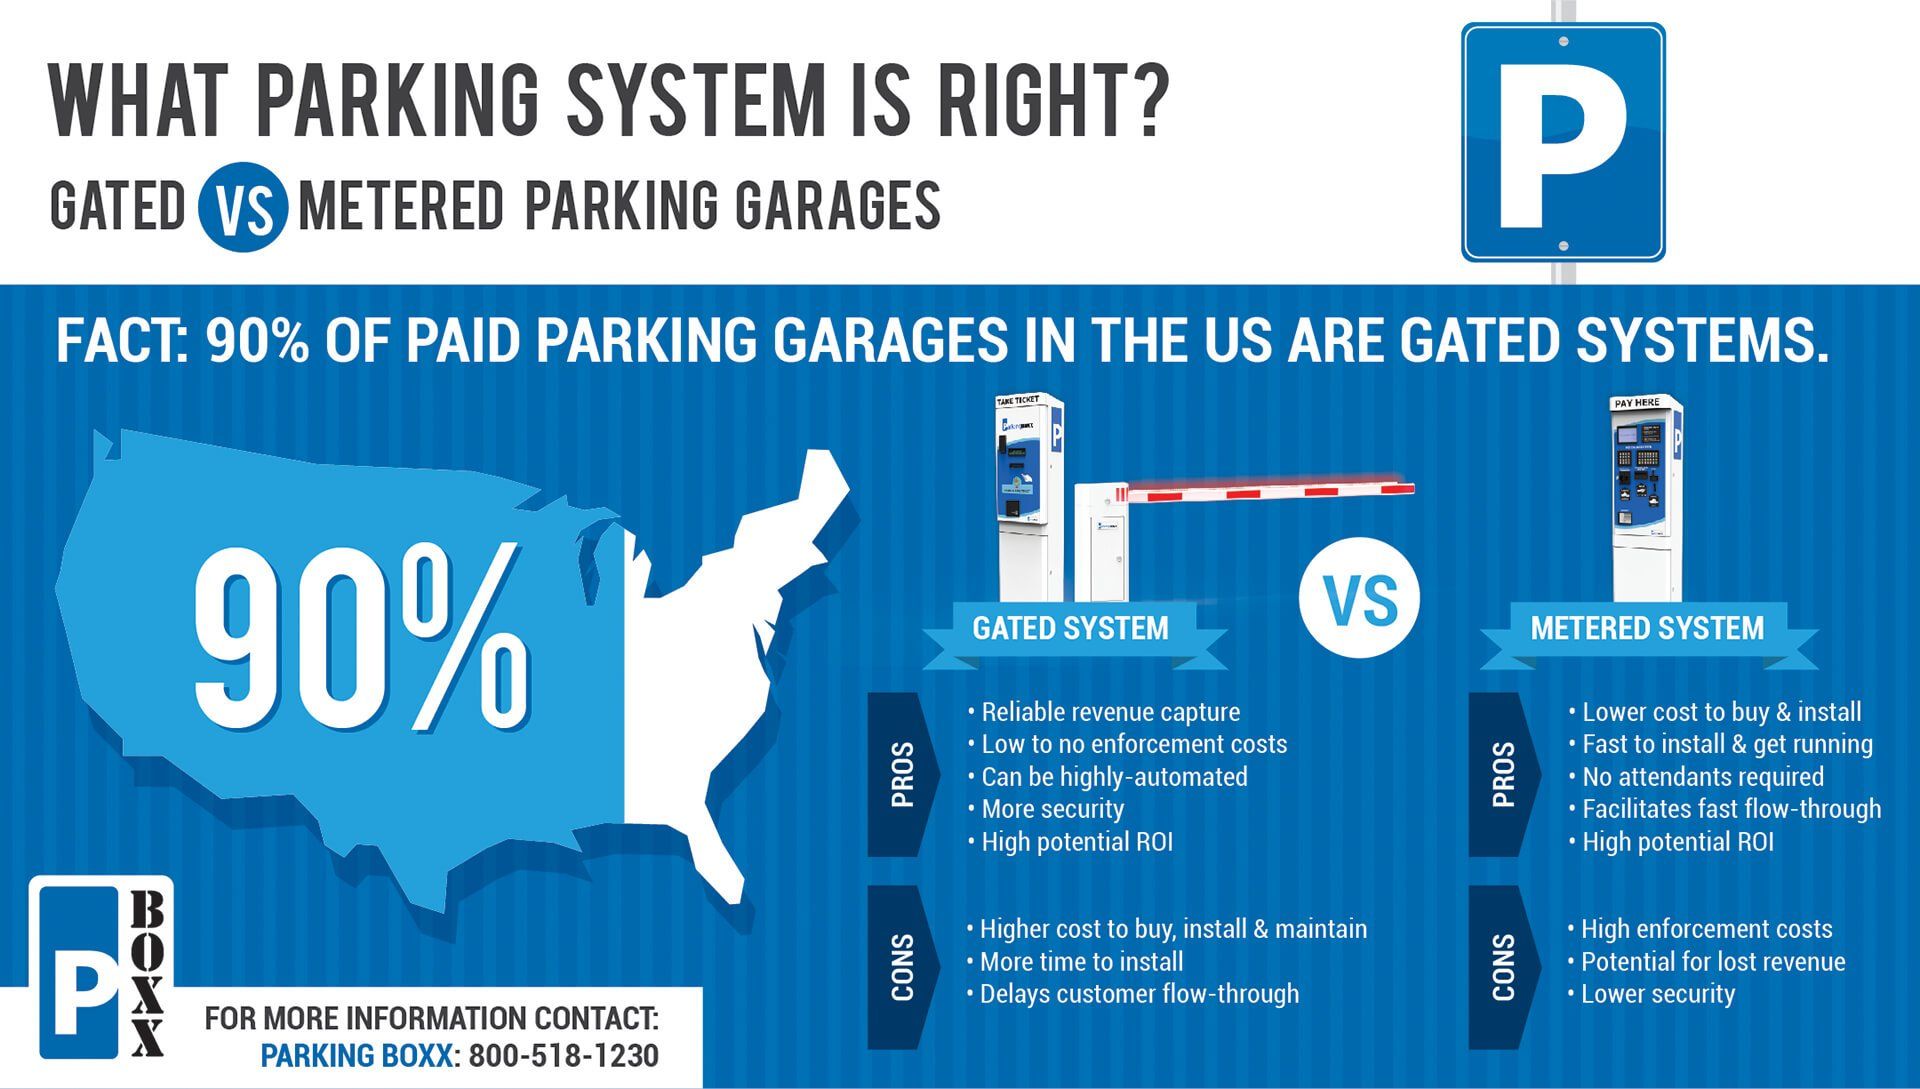 Parking System Infographic Compares Gated vs. Metered